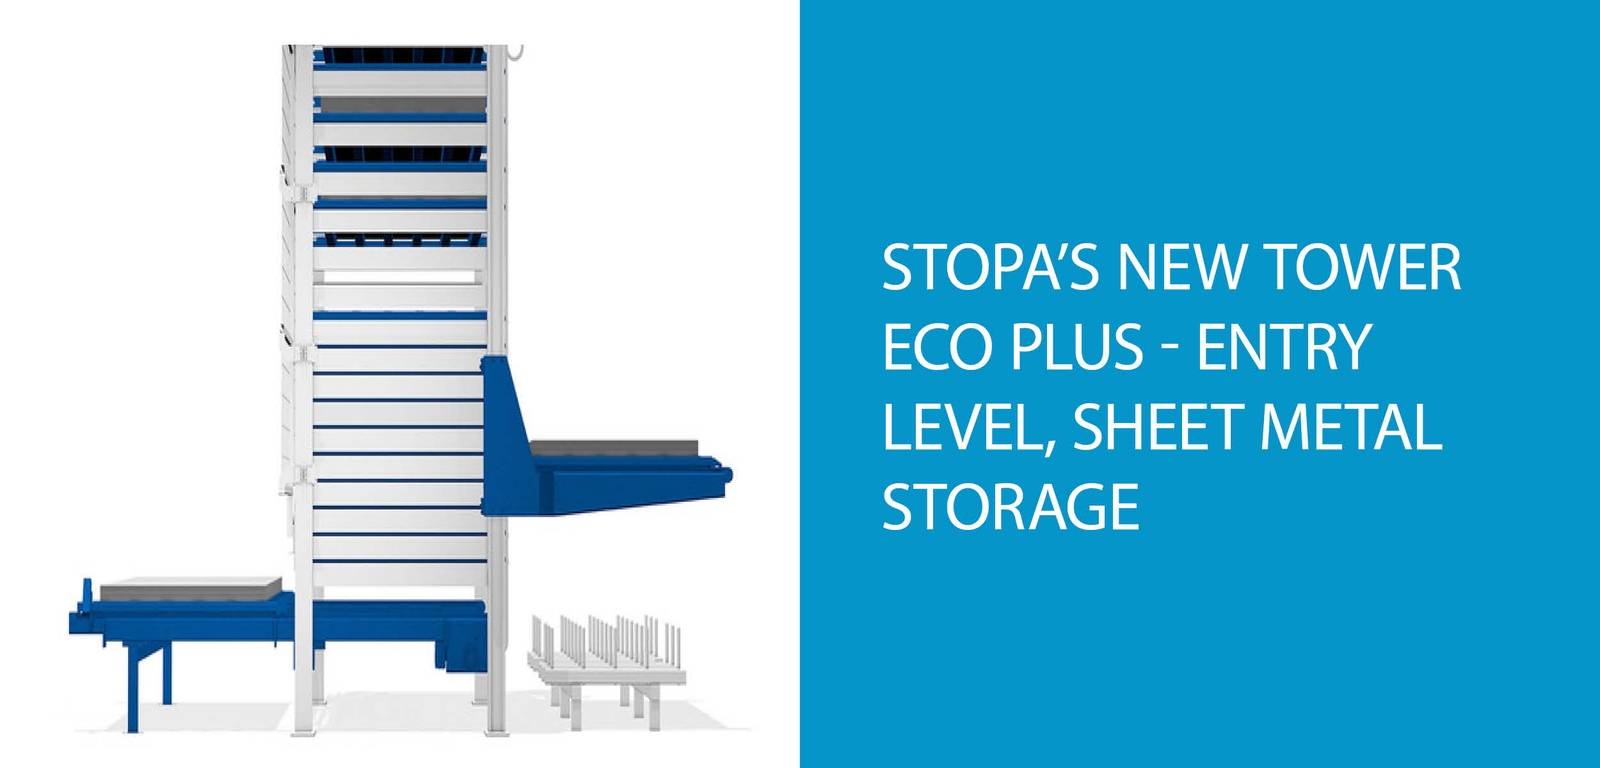 Introducing STOPA’s New Tower Eco Plus Bar Storage